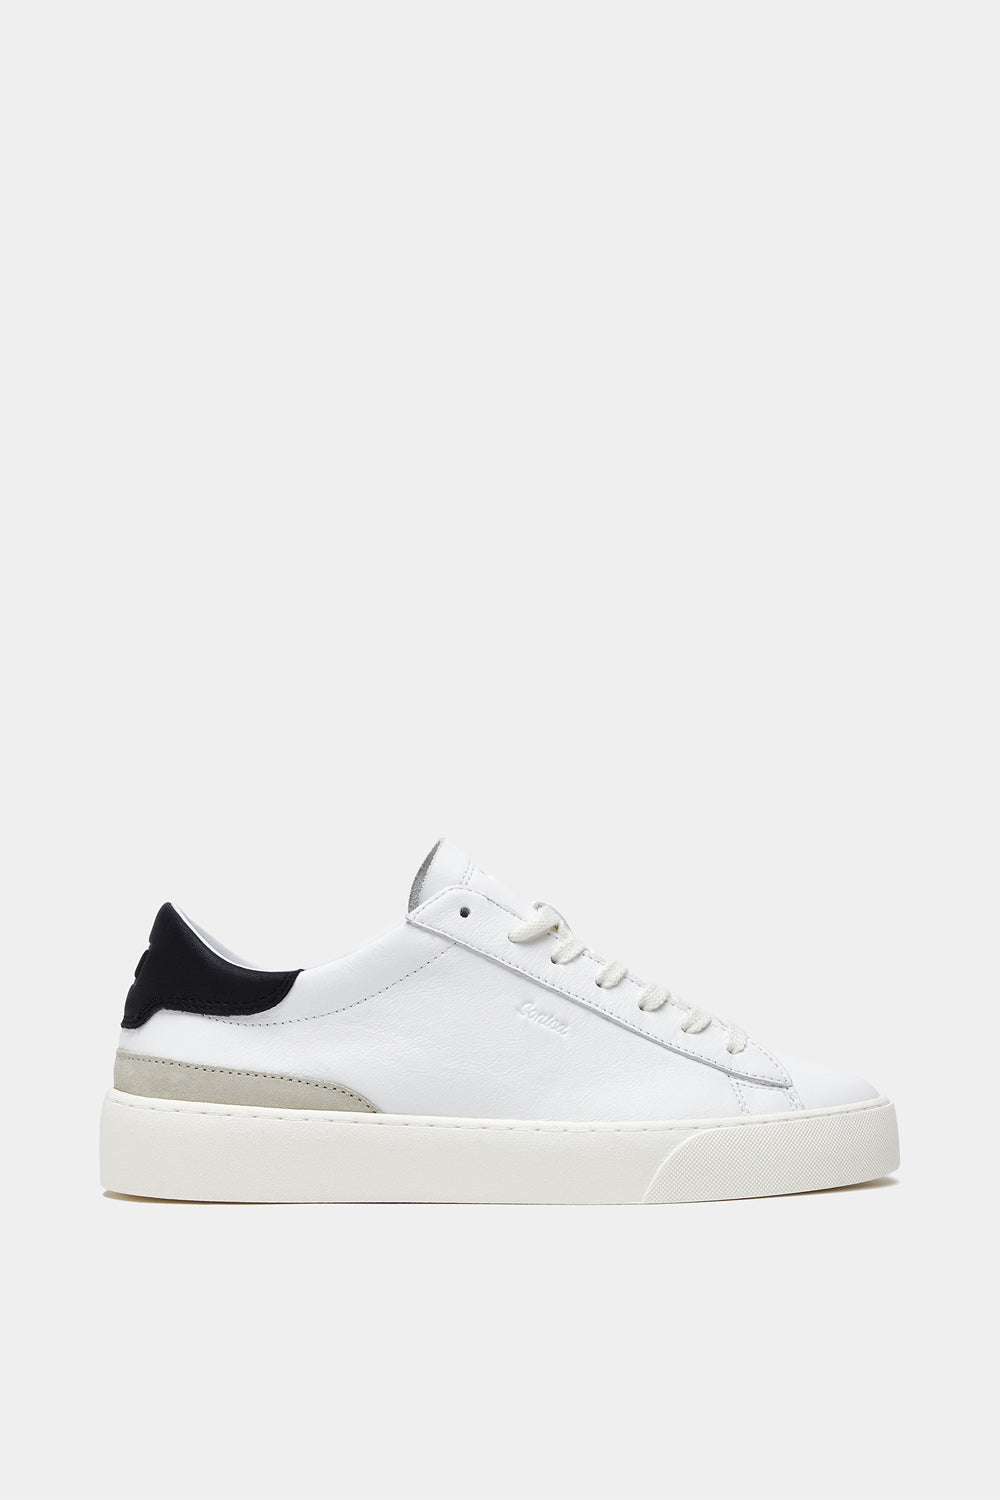 Buy the D.A.T.E. Sonica Calf Sneaker in White/Black at Intro. Spend £50 for free UK delivery. Official stockists. We ship worldwide.